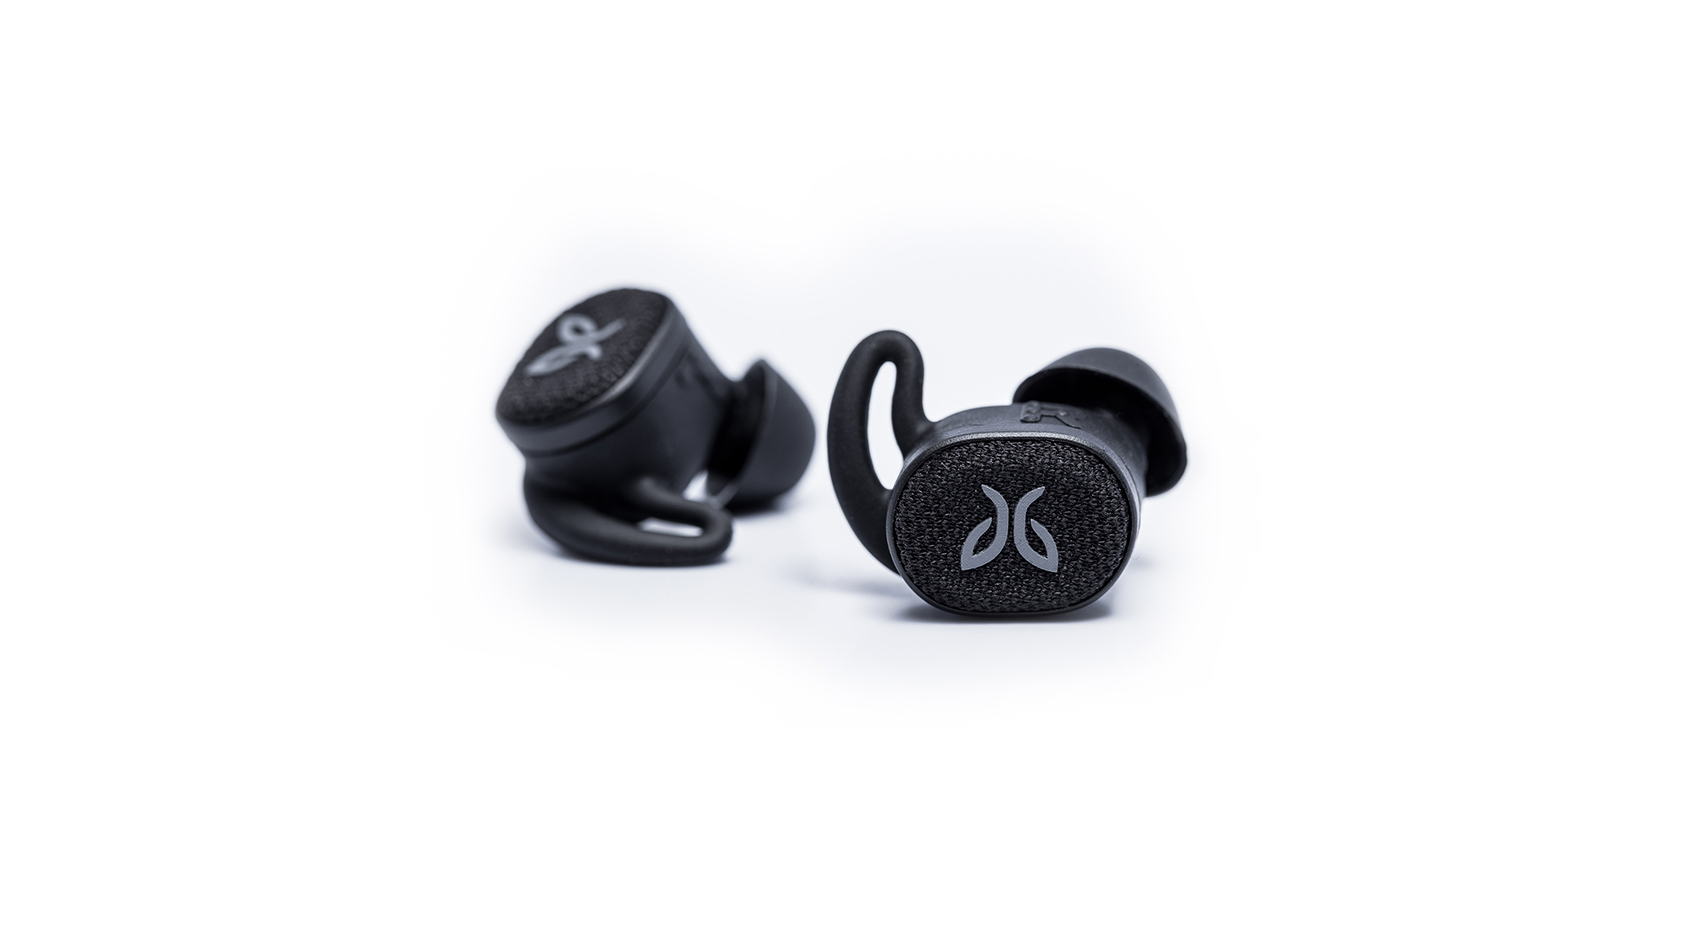 The Jaybird Vista 2 true wireless workout earbuds in black against a white background.